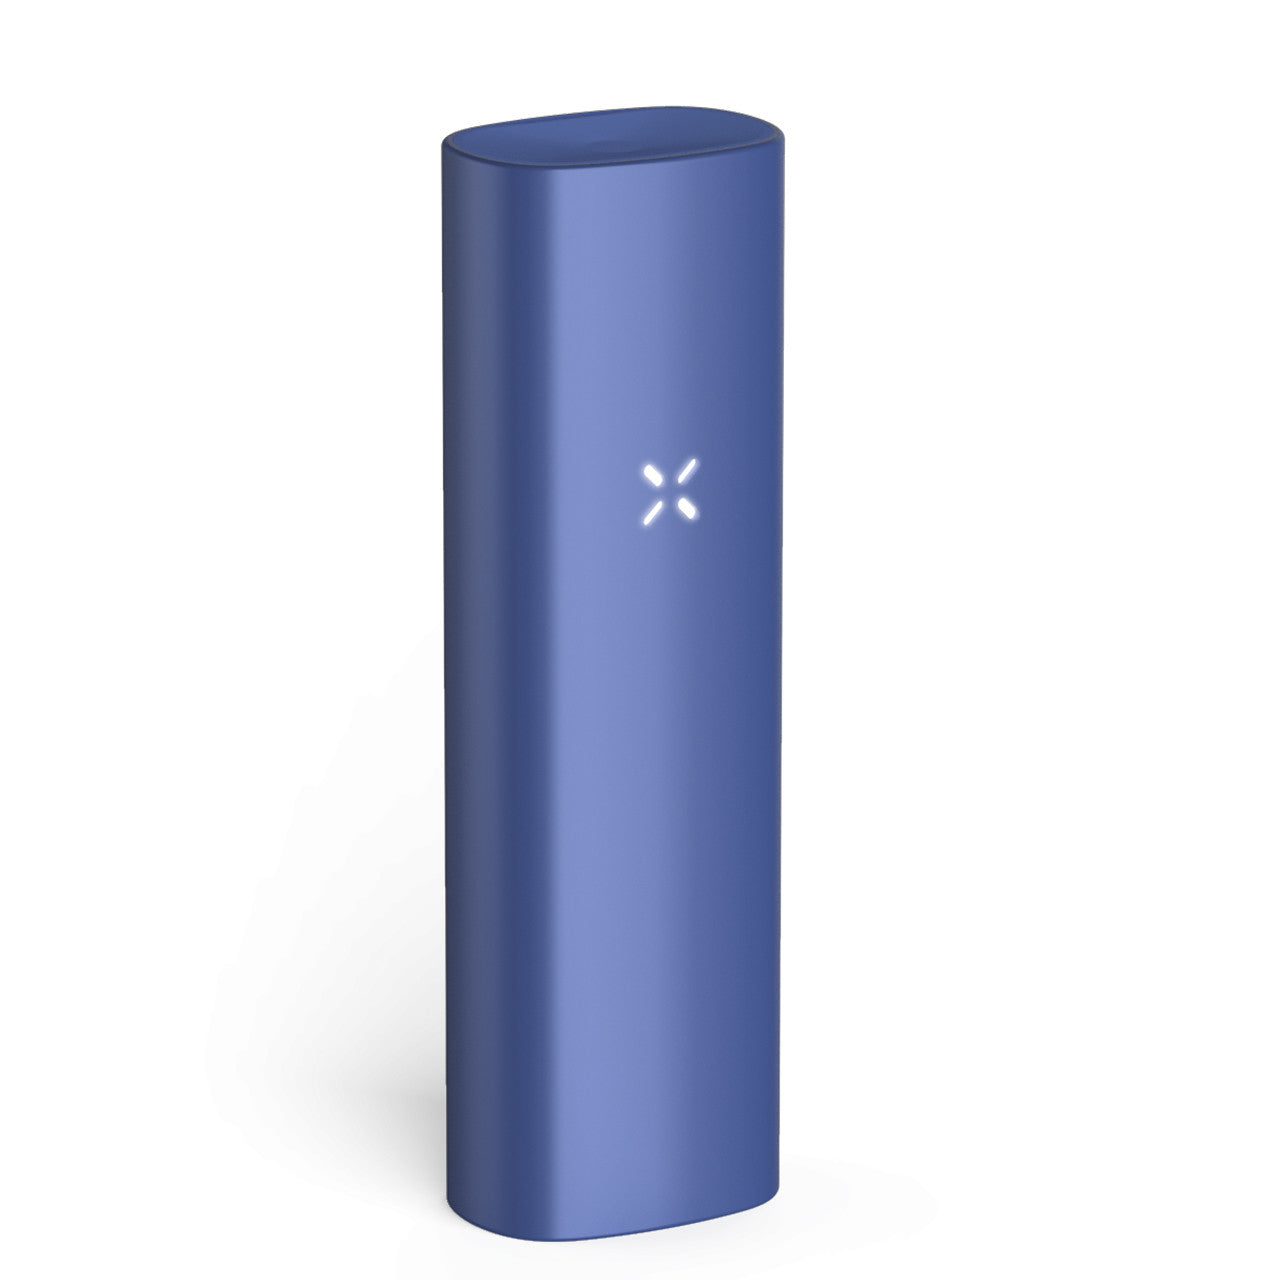 PAX Plus Basic Kit for Dry Herb and Concentrate - Periwinkle